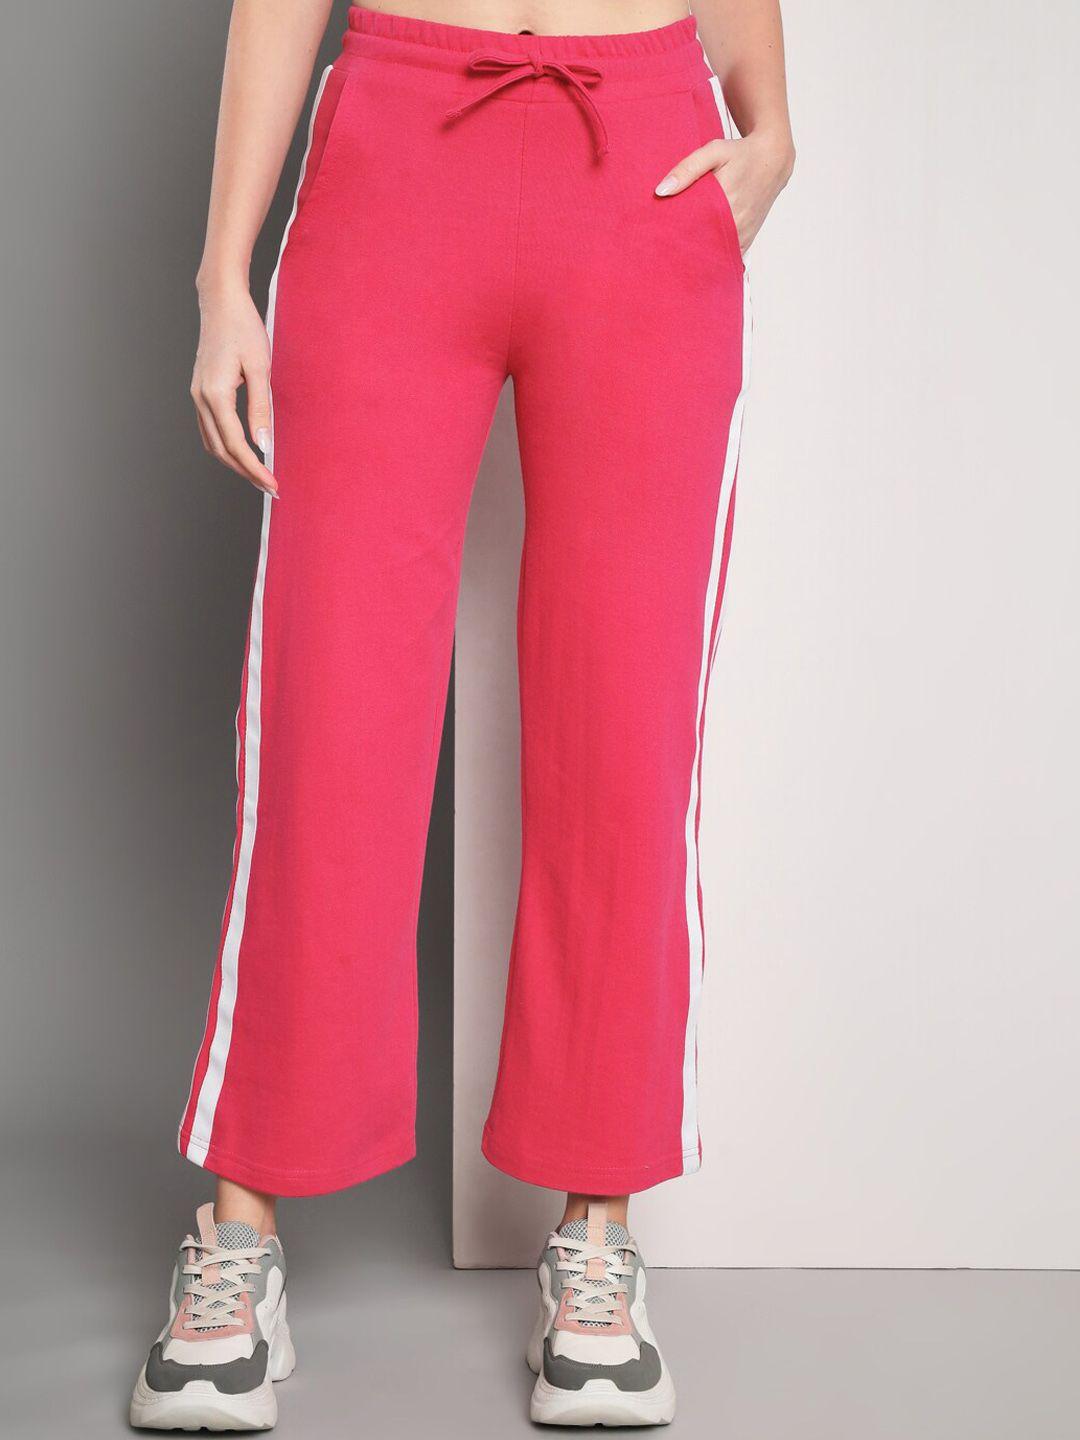 q-rious-women-mid-rise-side-striped-pure-cotton-flared-track-pant